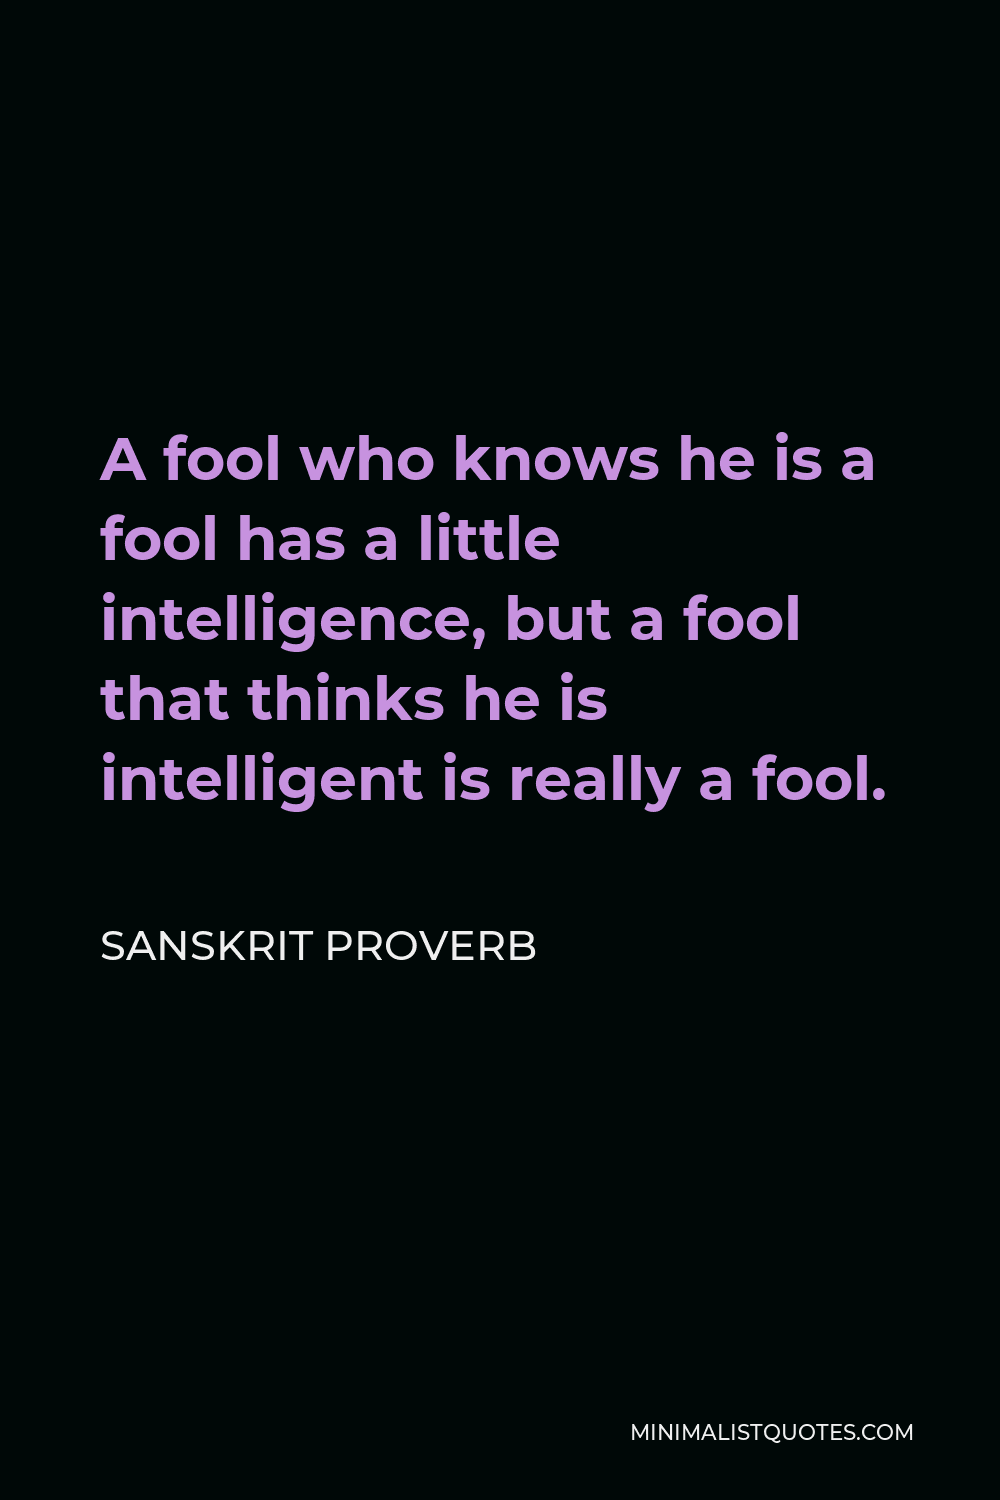 Sanskrit Proverb Quote - A fool who knows he is a fool has a little intelligence, but a fool that thinks he is intelligent is really a fool.